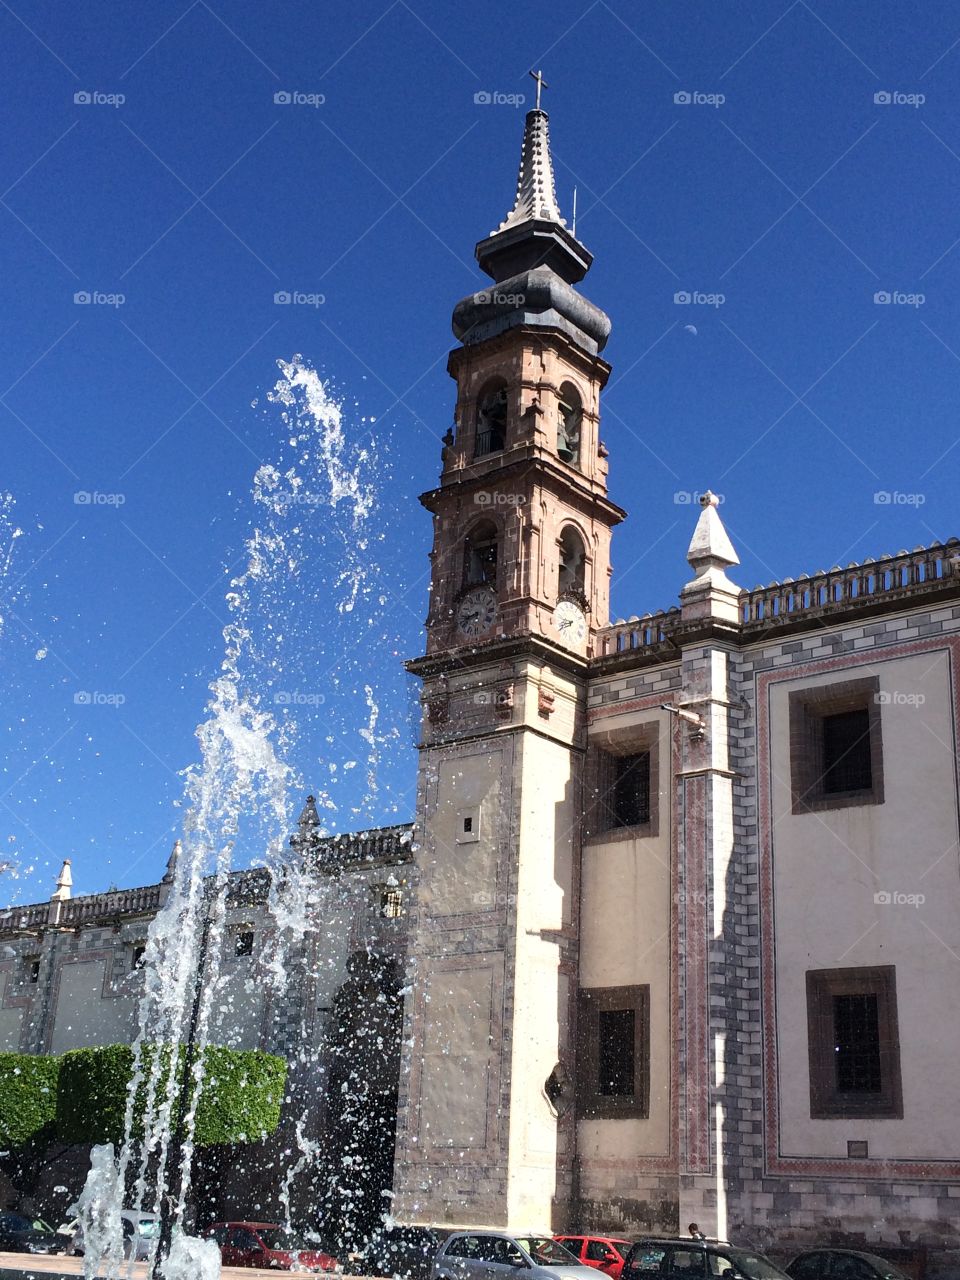 Architecture, Building, Church, Travel, Tower